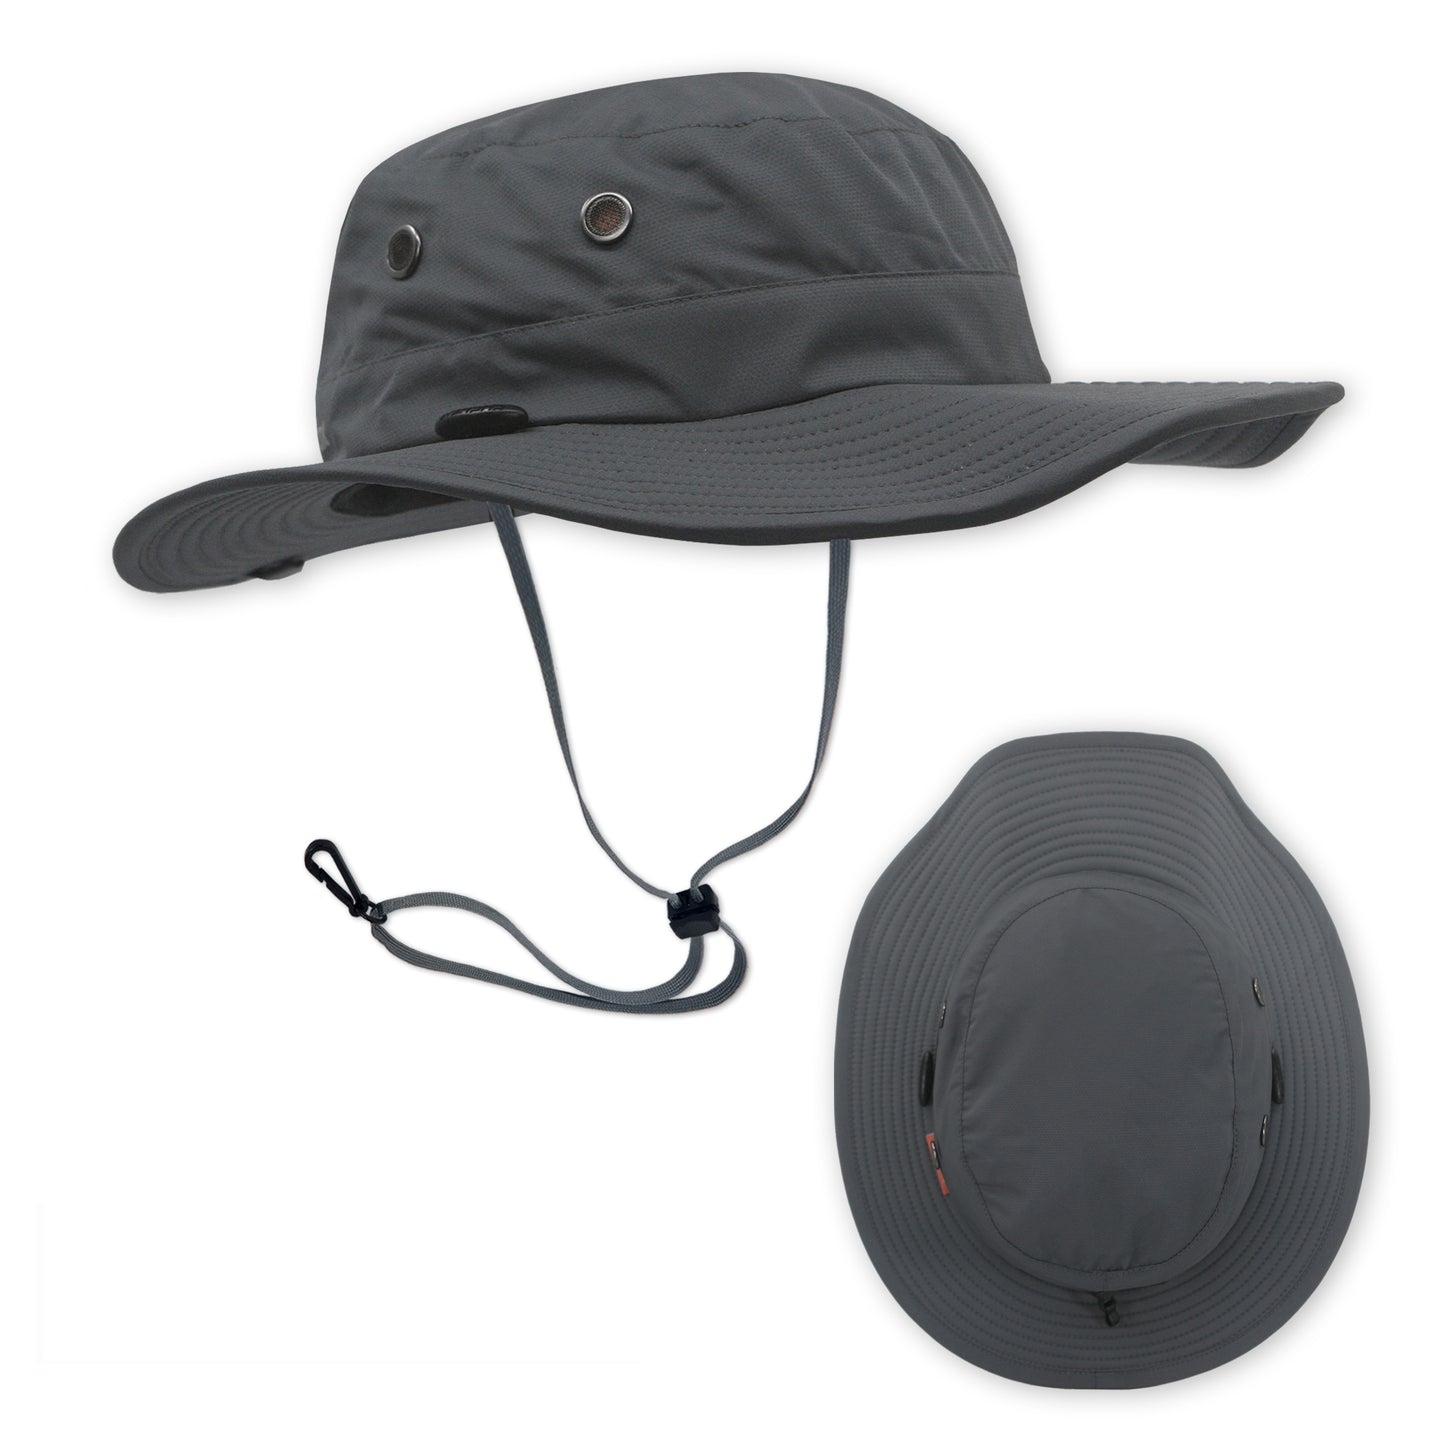 The 10 Best Fishing Hats Review: Shelta NO FLOP Sun Protecting Hat 